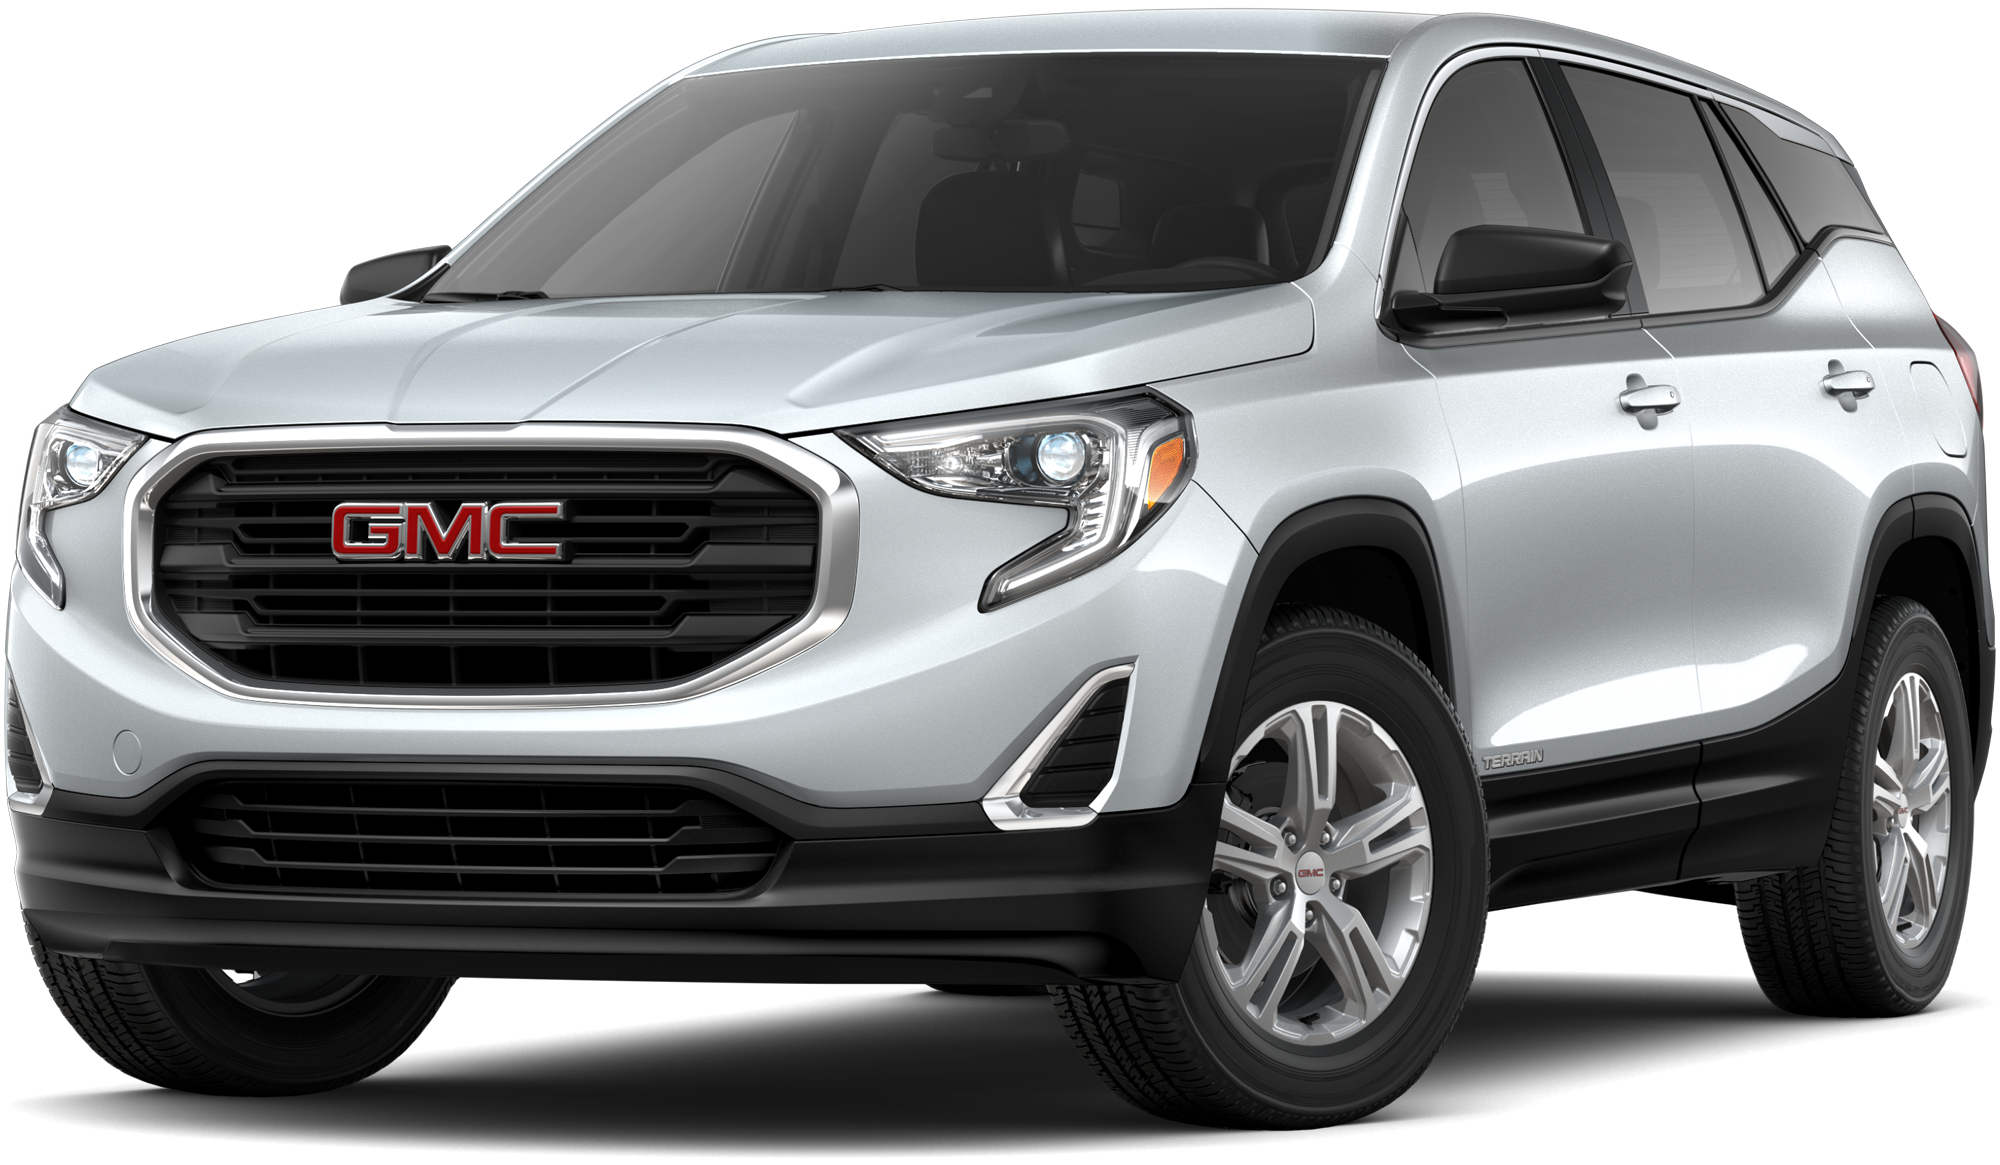 2021 GMC Terrain Incentives, Specials & Offers in Westborough MA